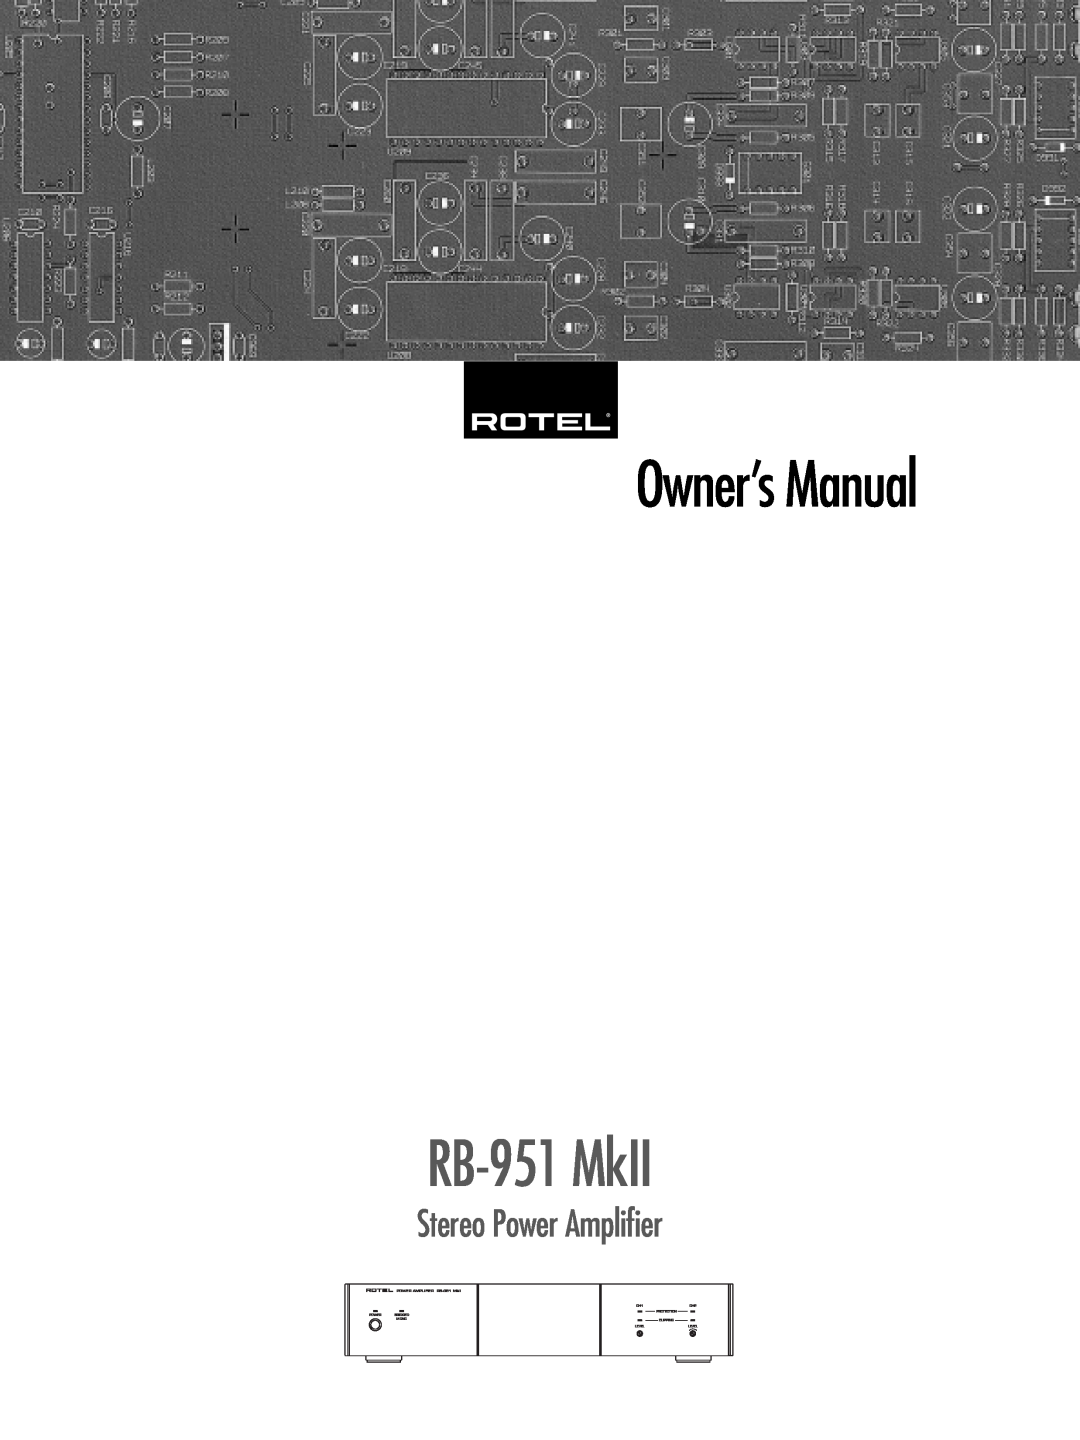 Rotel owner manual Stereo Power Amplifier, POWER AMPLIFIER RB-951MkII POWER BRIDGED MONO, Protection, Level, Clipping 